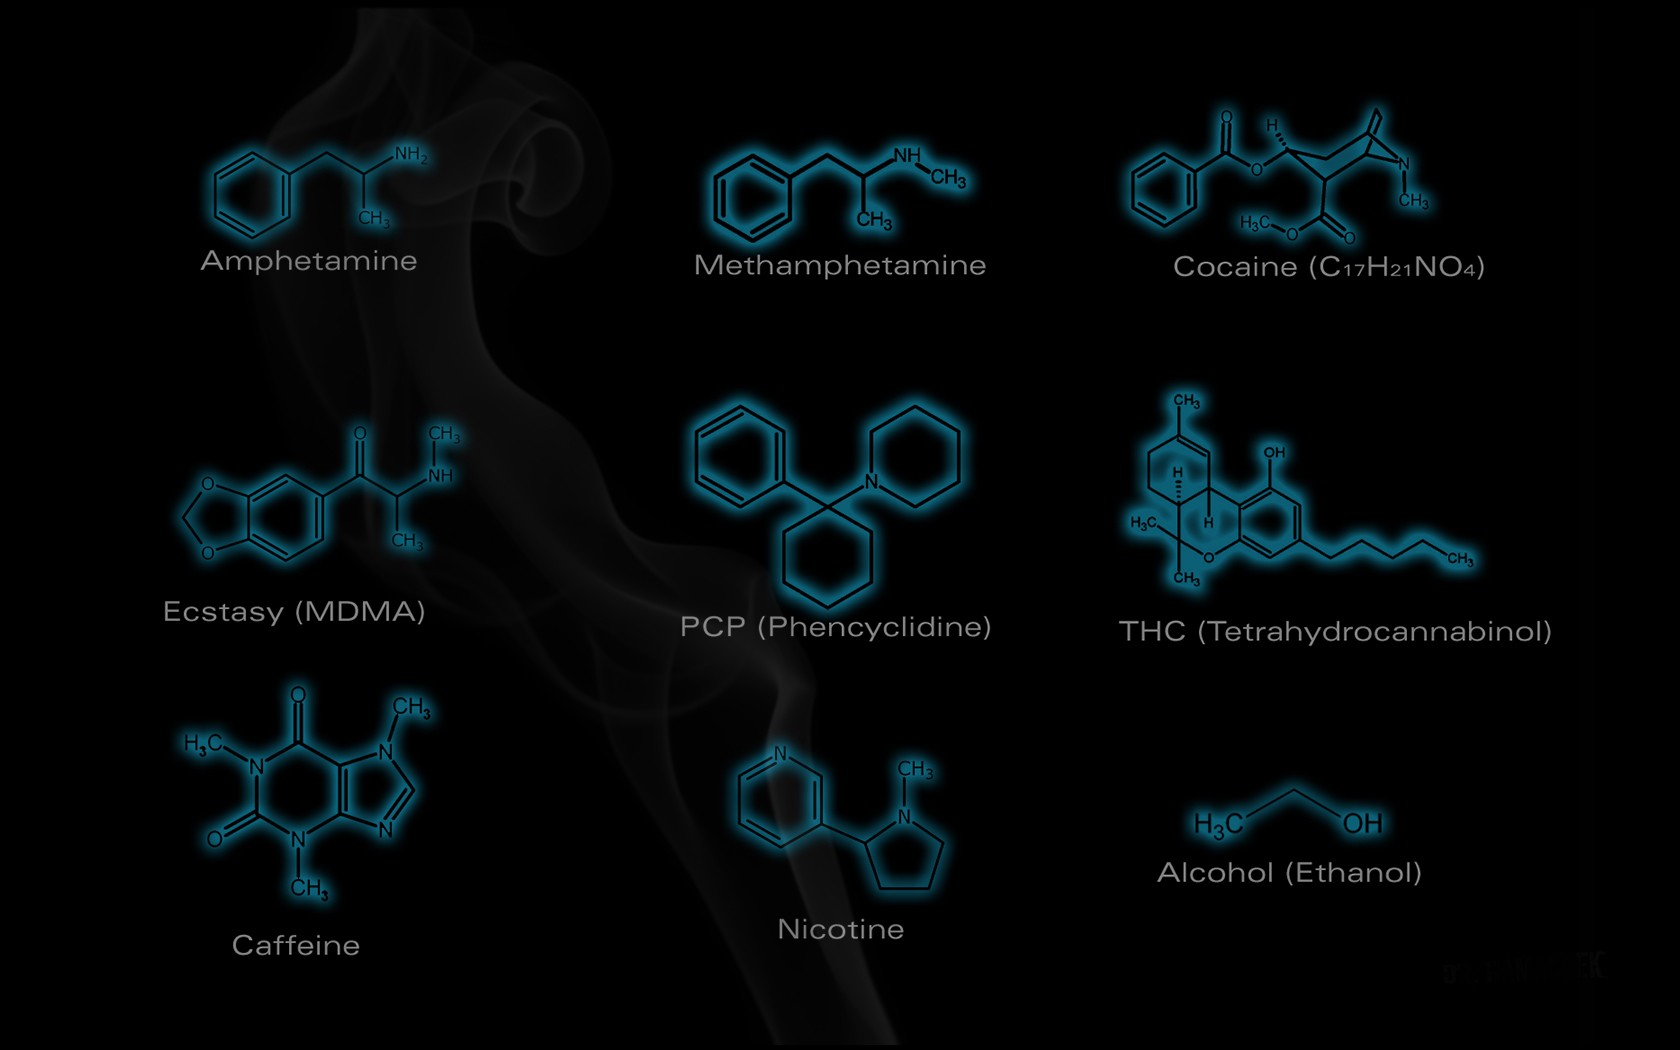 General 1680x1050 chemistry minimalism science simple background black background drugs black caffeine meth alcohol thc symbols chemical structures